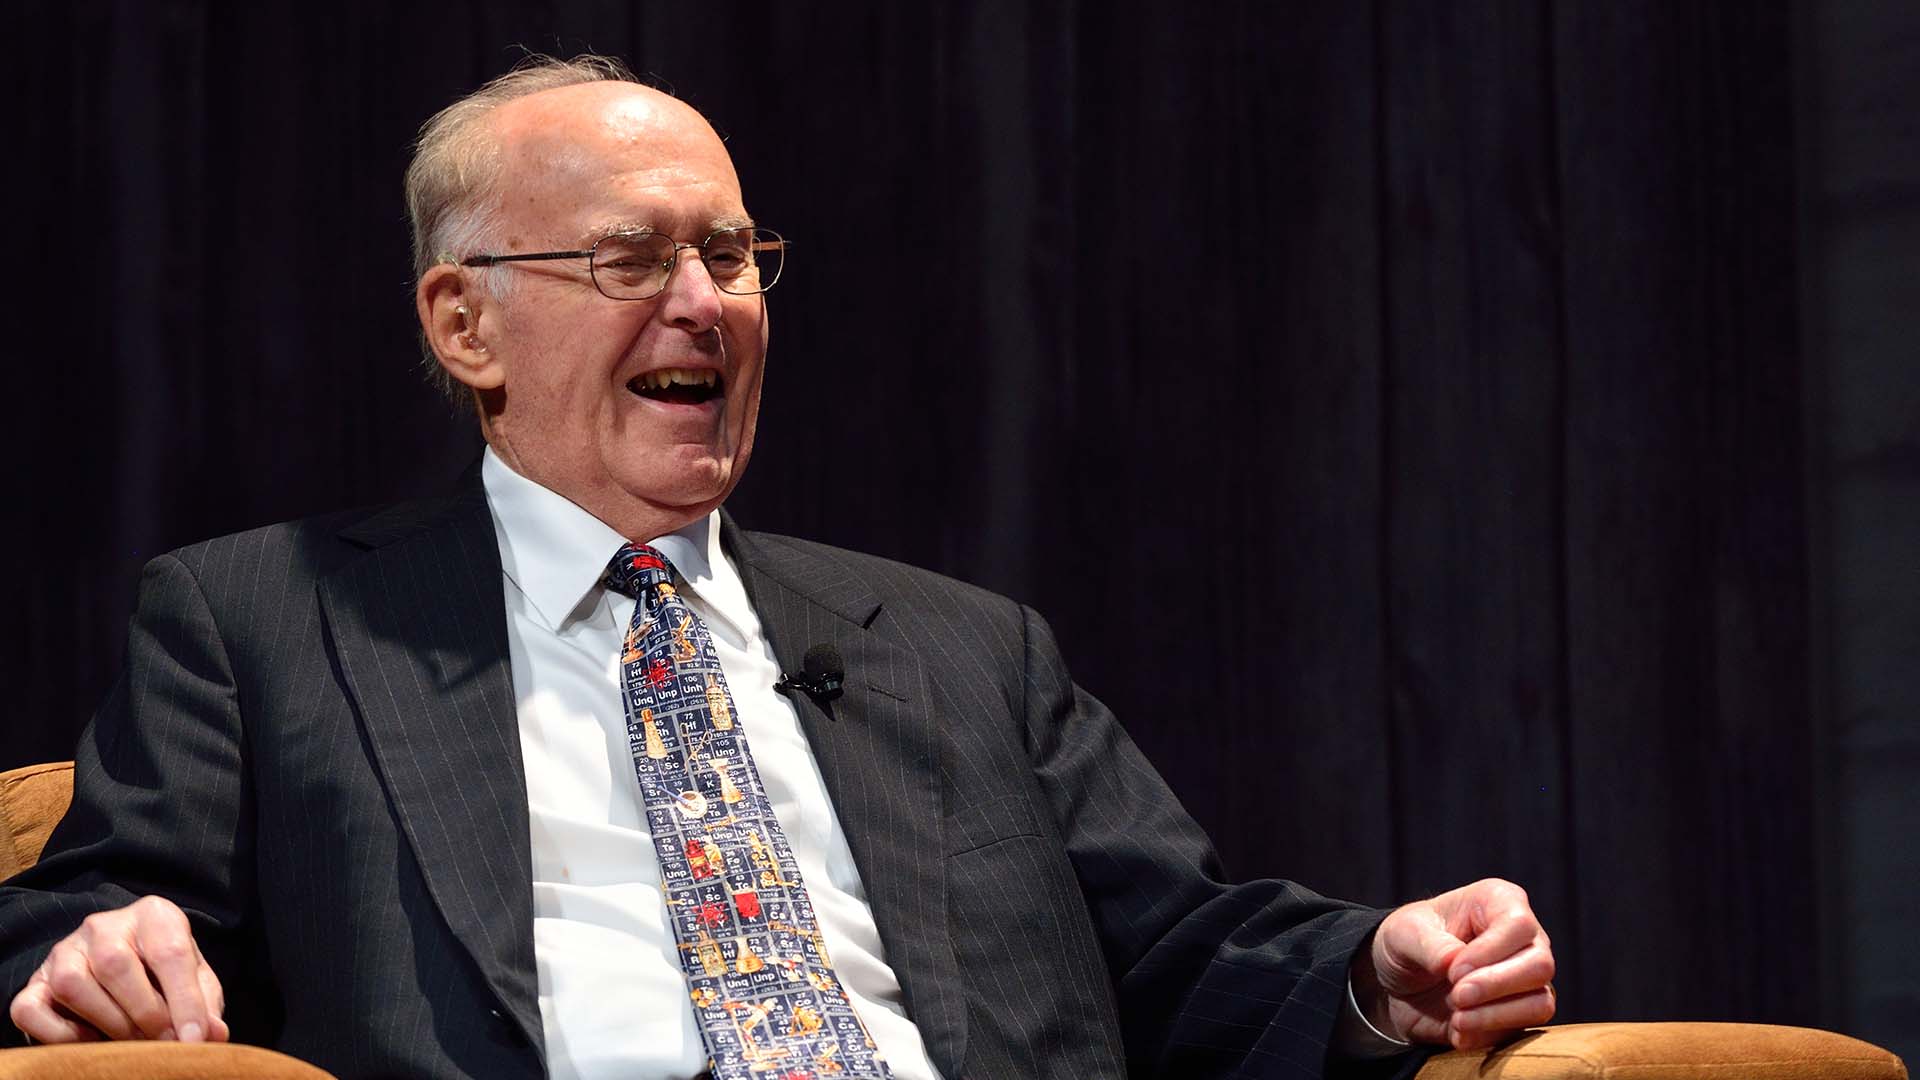 Gordon Moore, co-founder of Intel interviewed in 2015